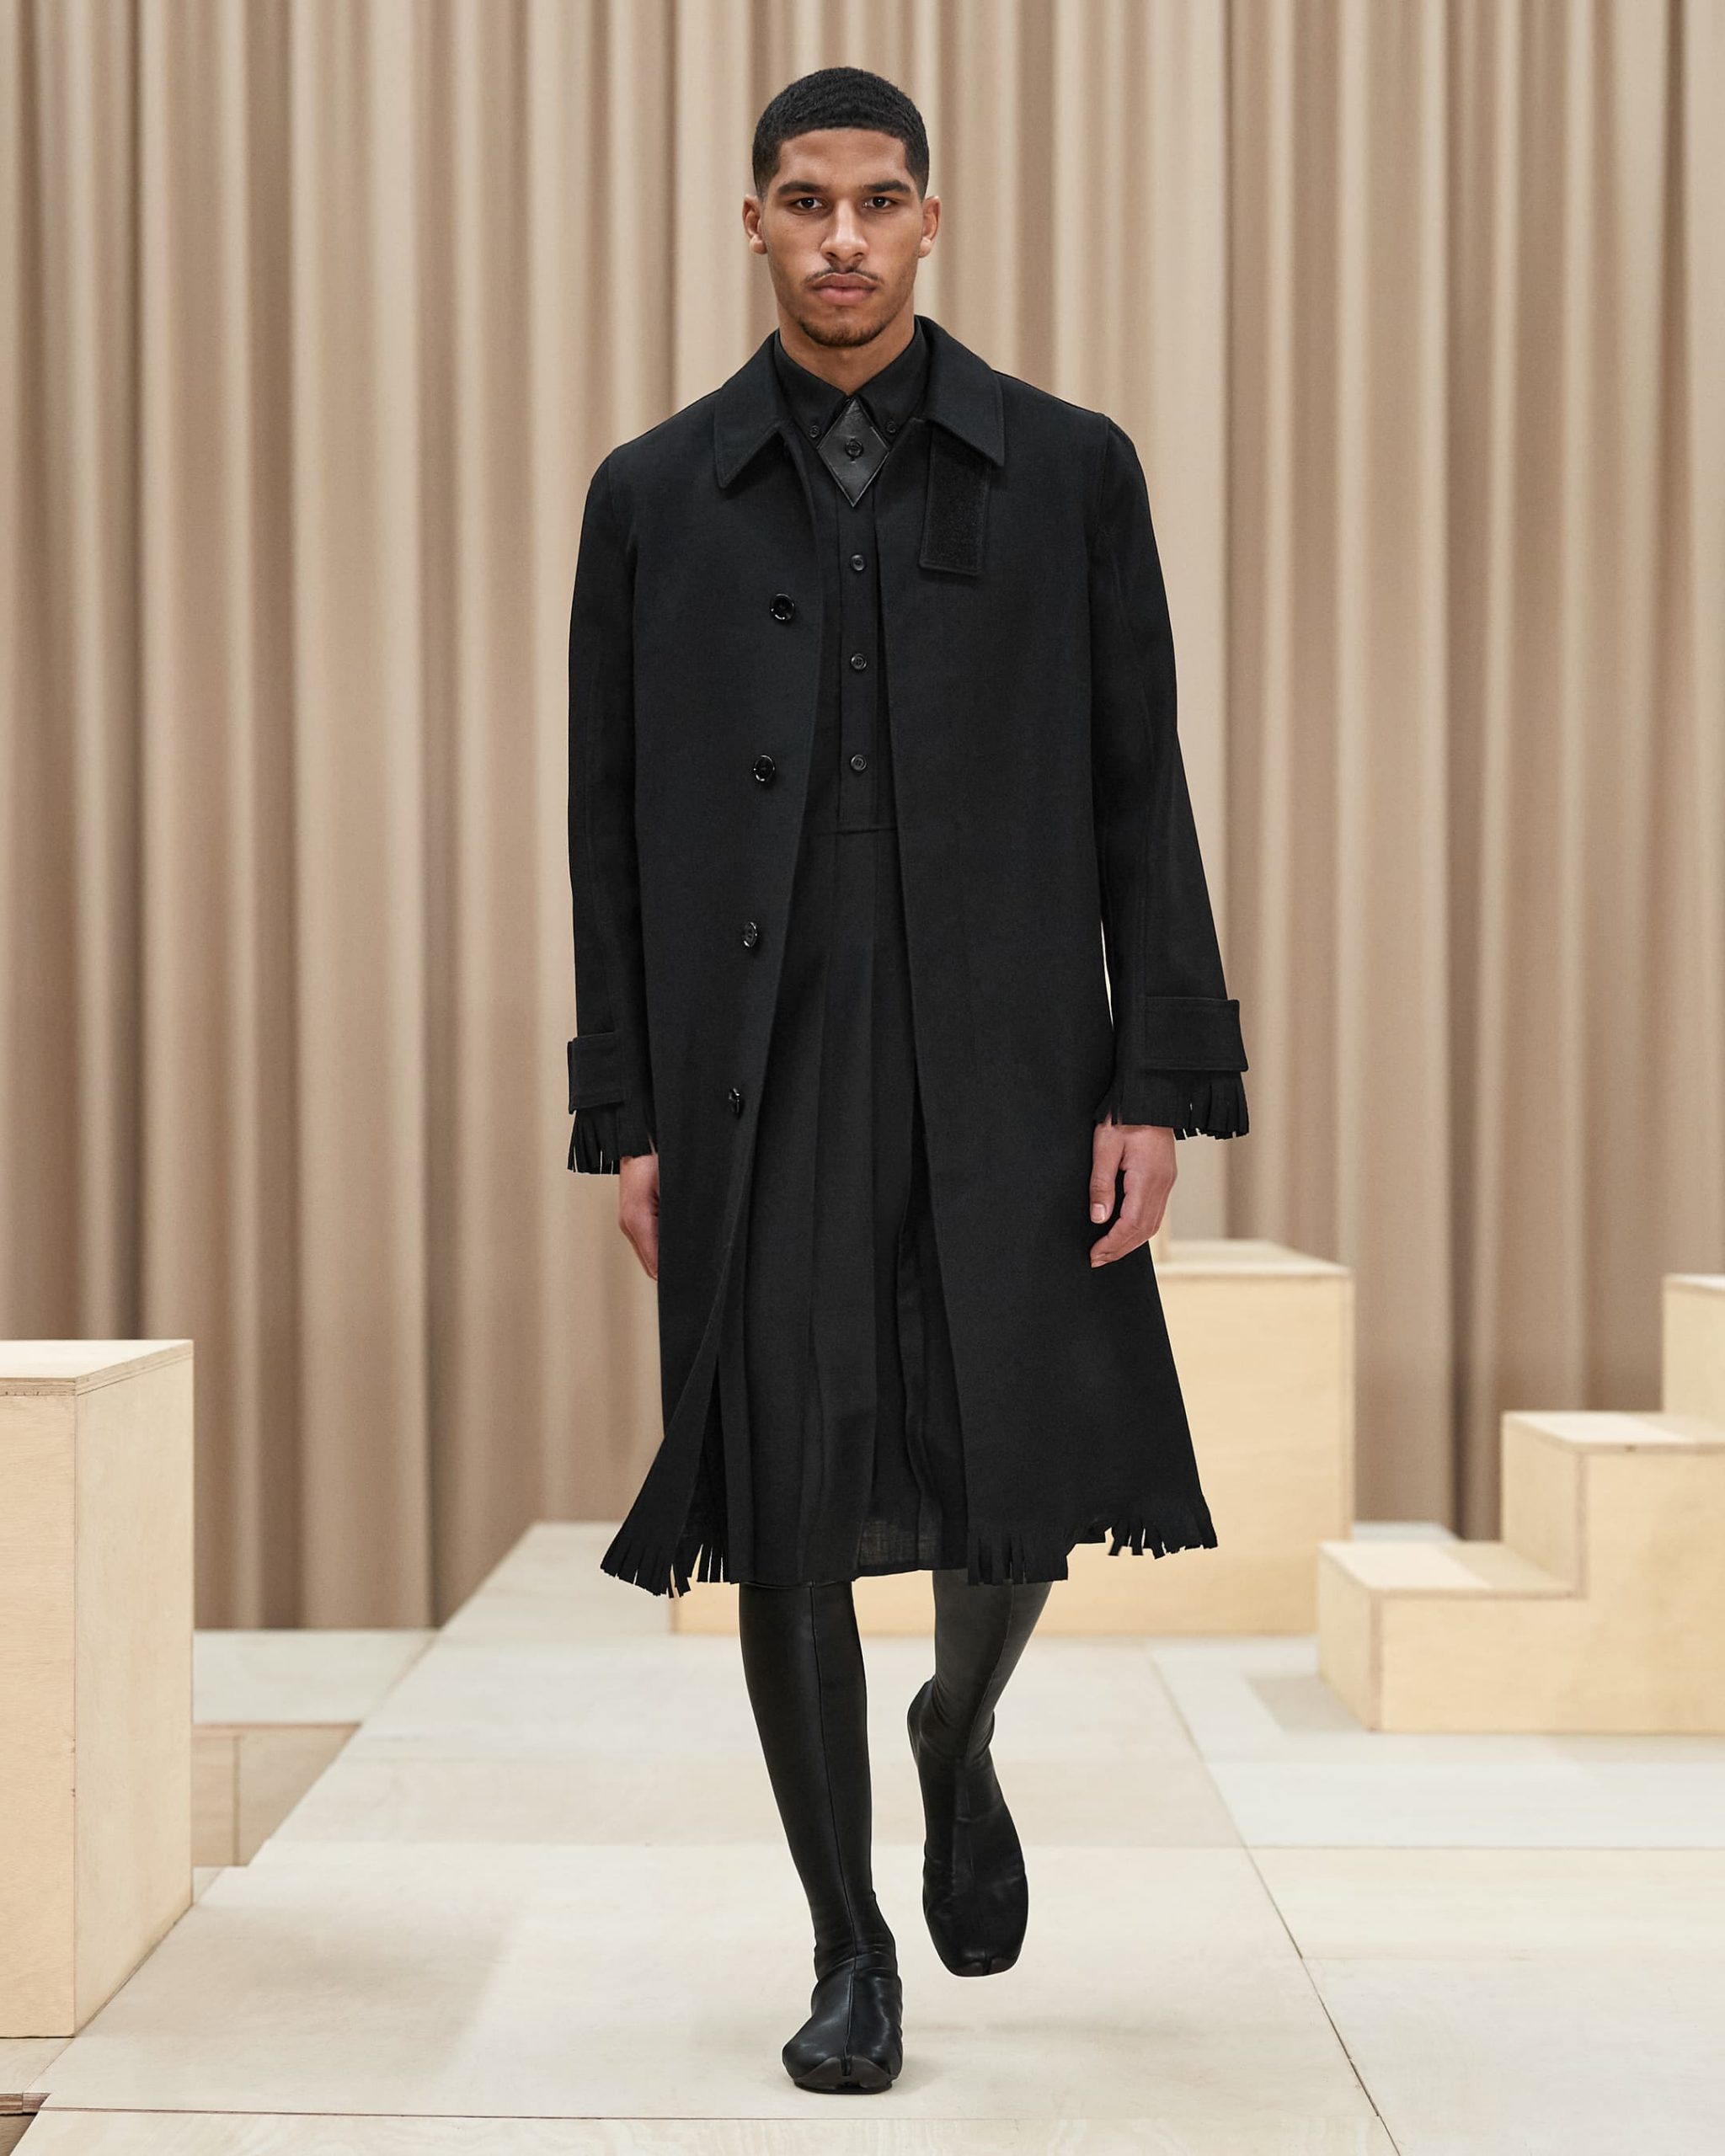 Burberry Men's Fall 2021 Fashion Show Review | The Impression